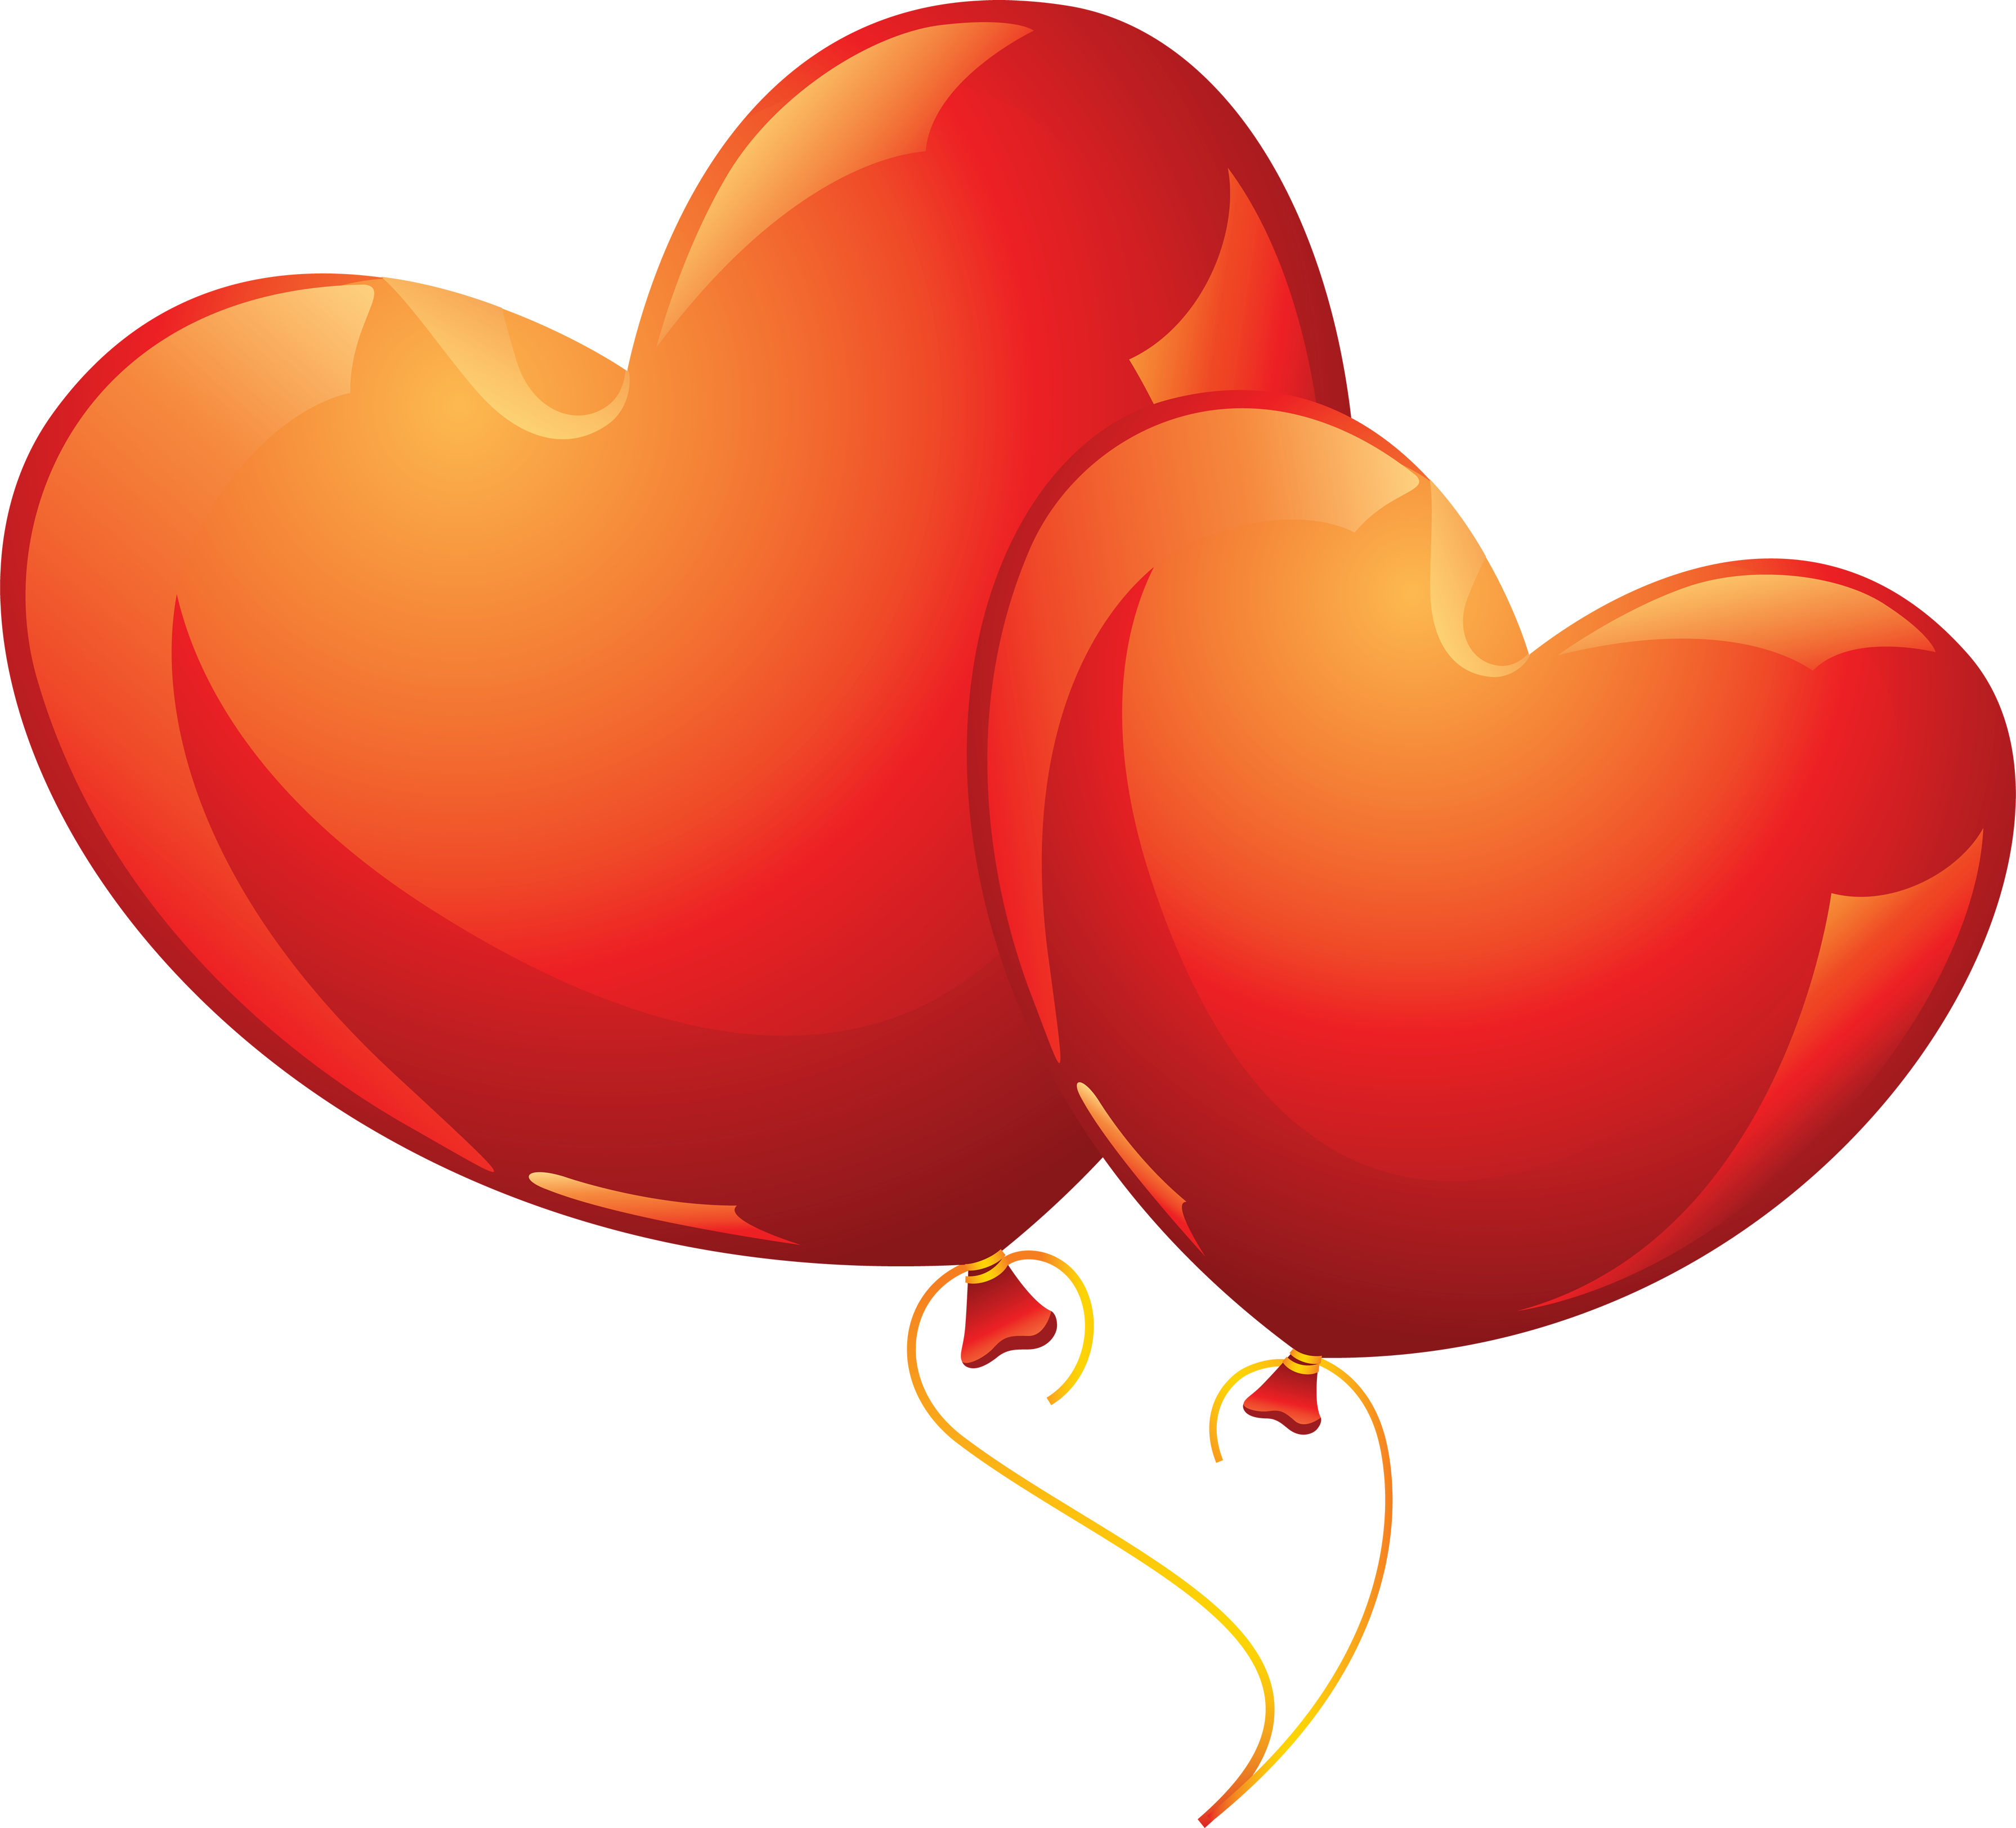 Download PNG image: Heart balloon PNG image, free download, heart ...